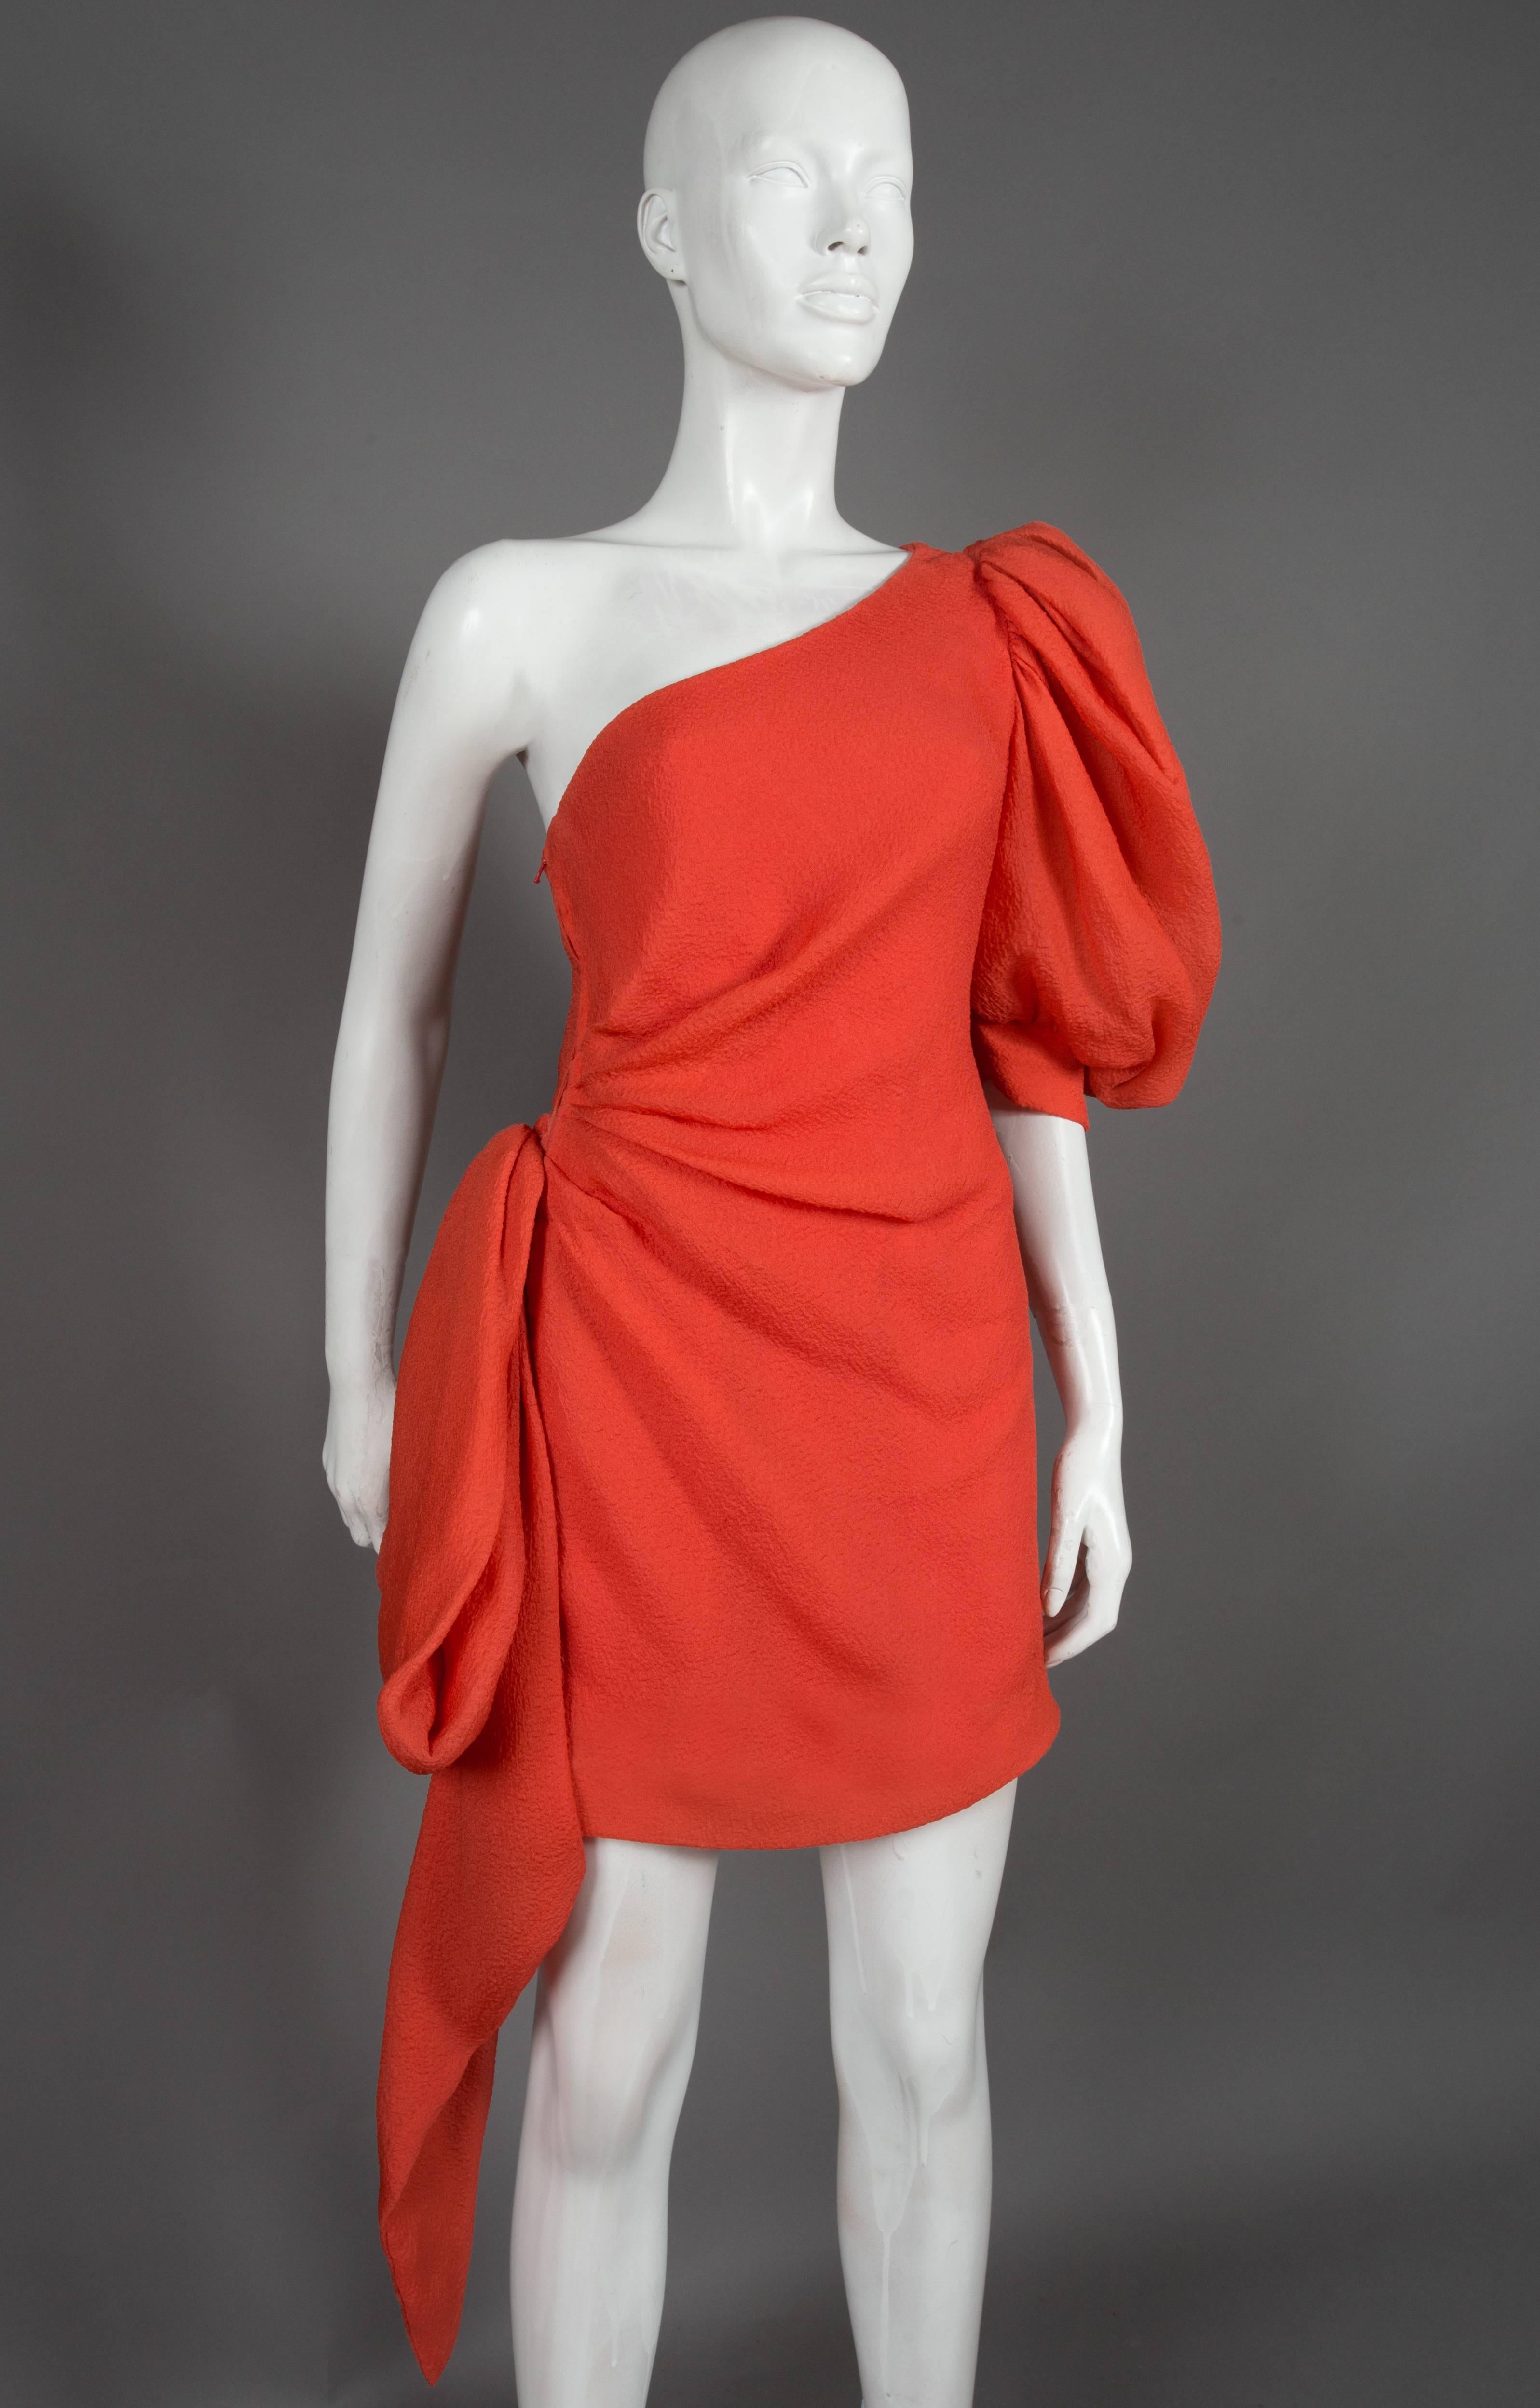 This is a beautiful asymmetric cocktail dress designed by the great Hubert de Givenchy, the dress is in his signature coral colour in a 100% silk crêpe and features a balloon sleeve and an extravagant bow which folds to the front. 

This dress